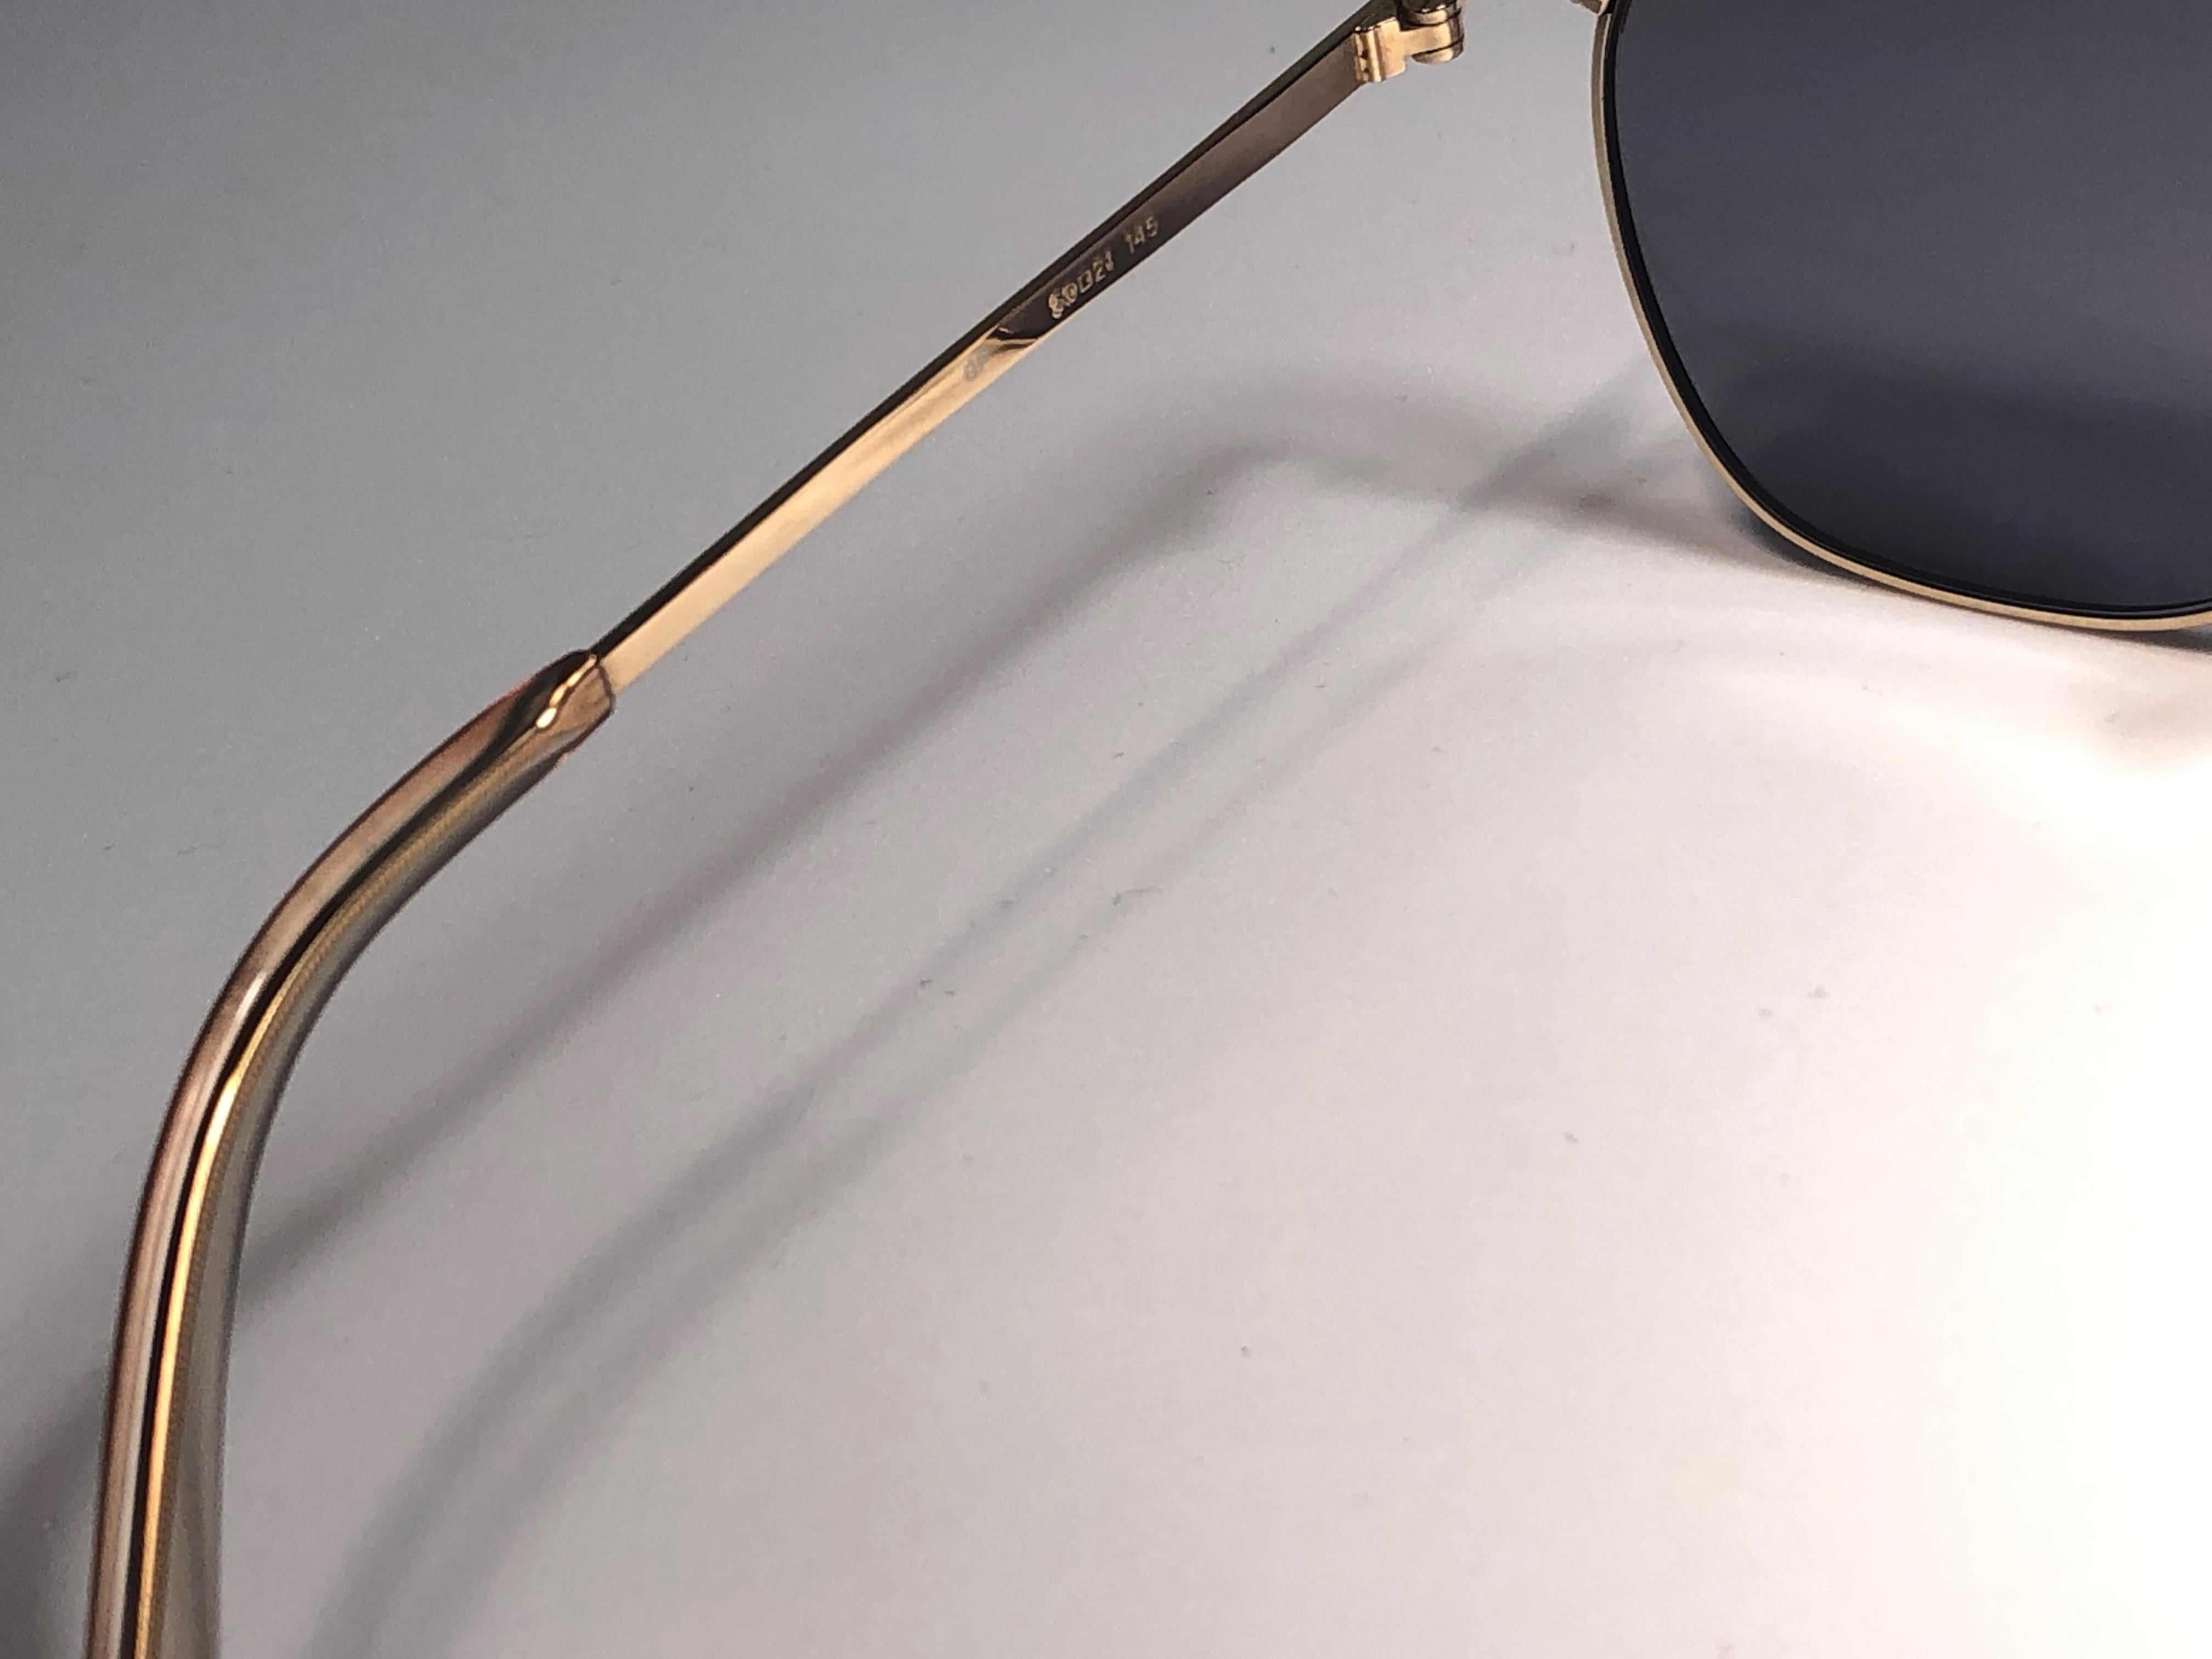 New Jean Paul Gaultier 57 0172 Oval Gold Sunglasses 1990's Made in Japan  In New Condition For Sale In Baleares, Baleares